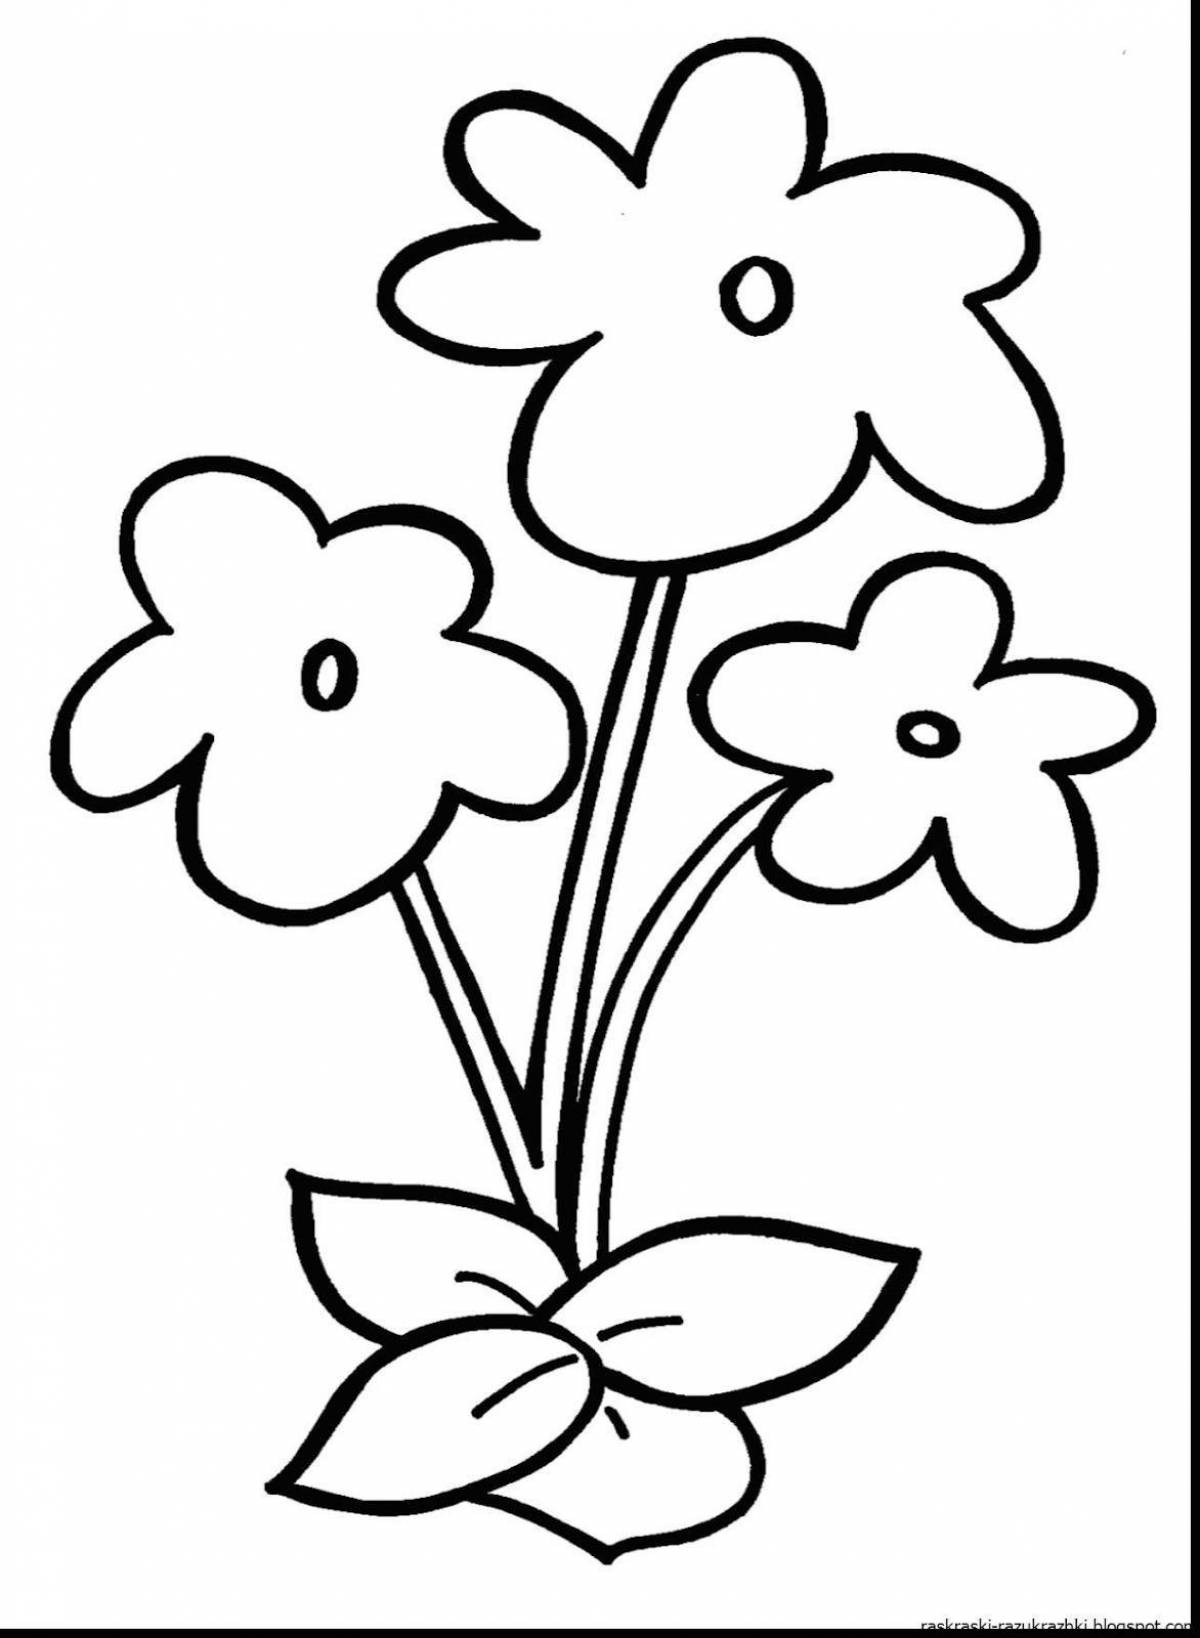 Playful coloring flowers for baby